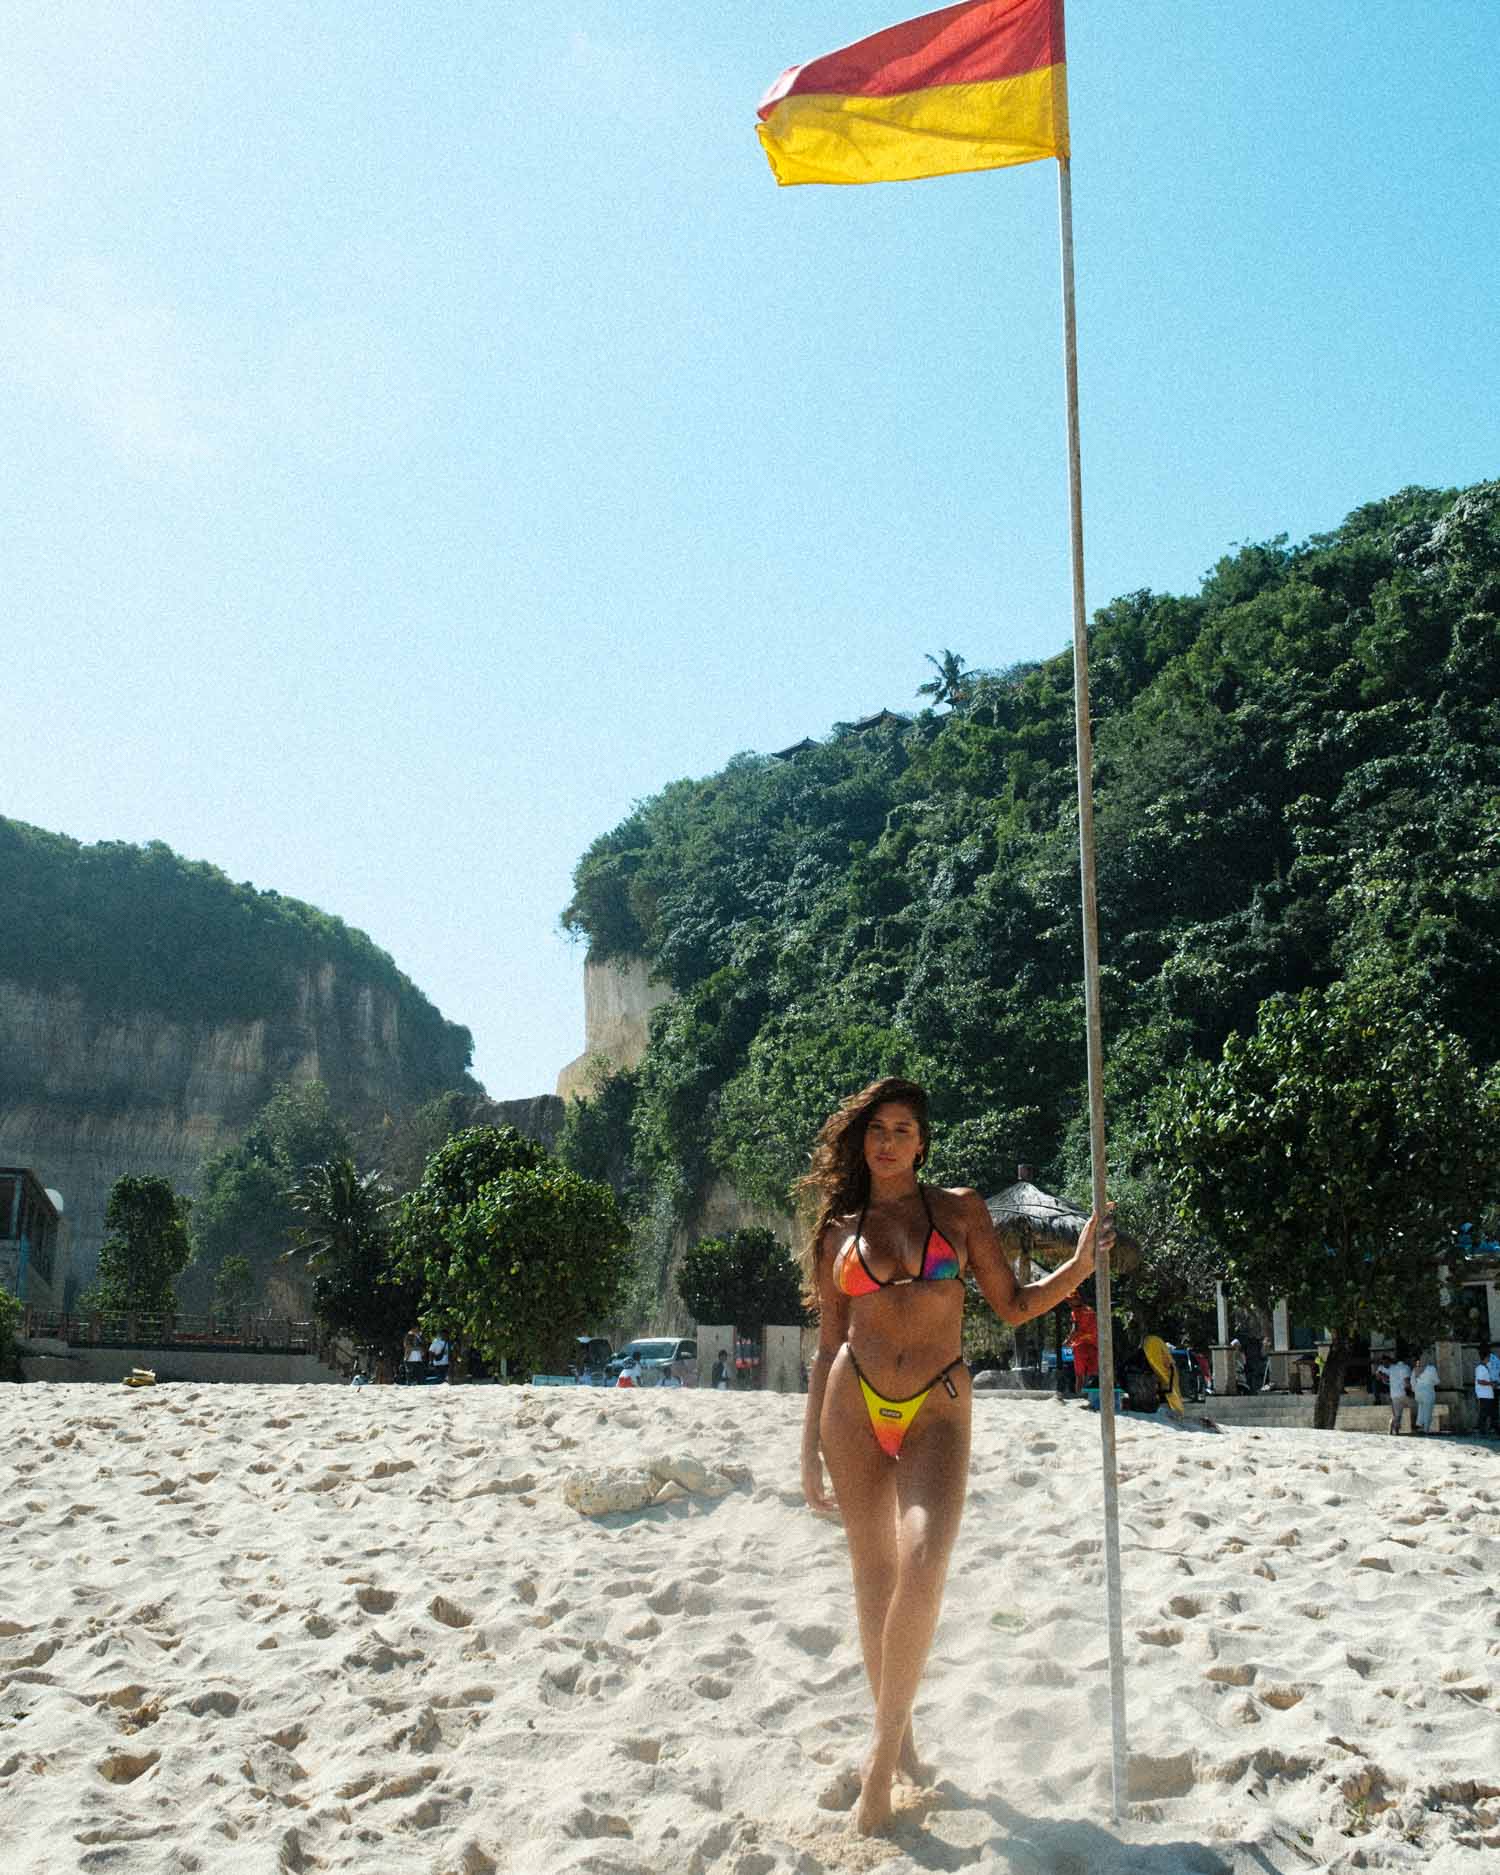 The beach becomes a runway as the model strikes a confident pose in the thong-style, high-waisted bikini with a captivating multihued gradient print. The distinctive triangle shape adds elegance to the scene, capturing the essence of a stylish summer beach day.